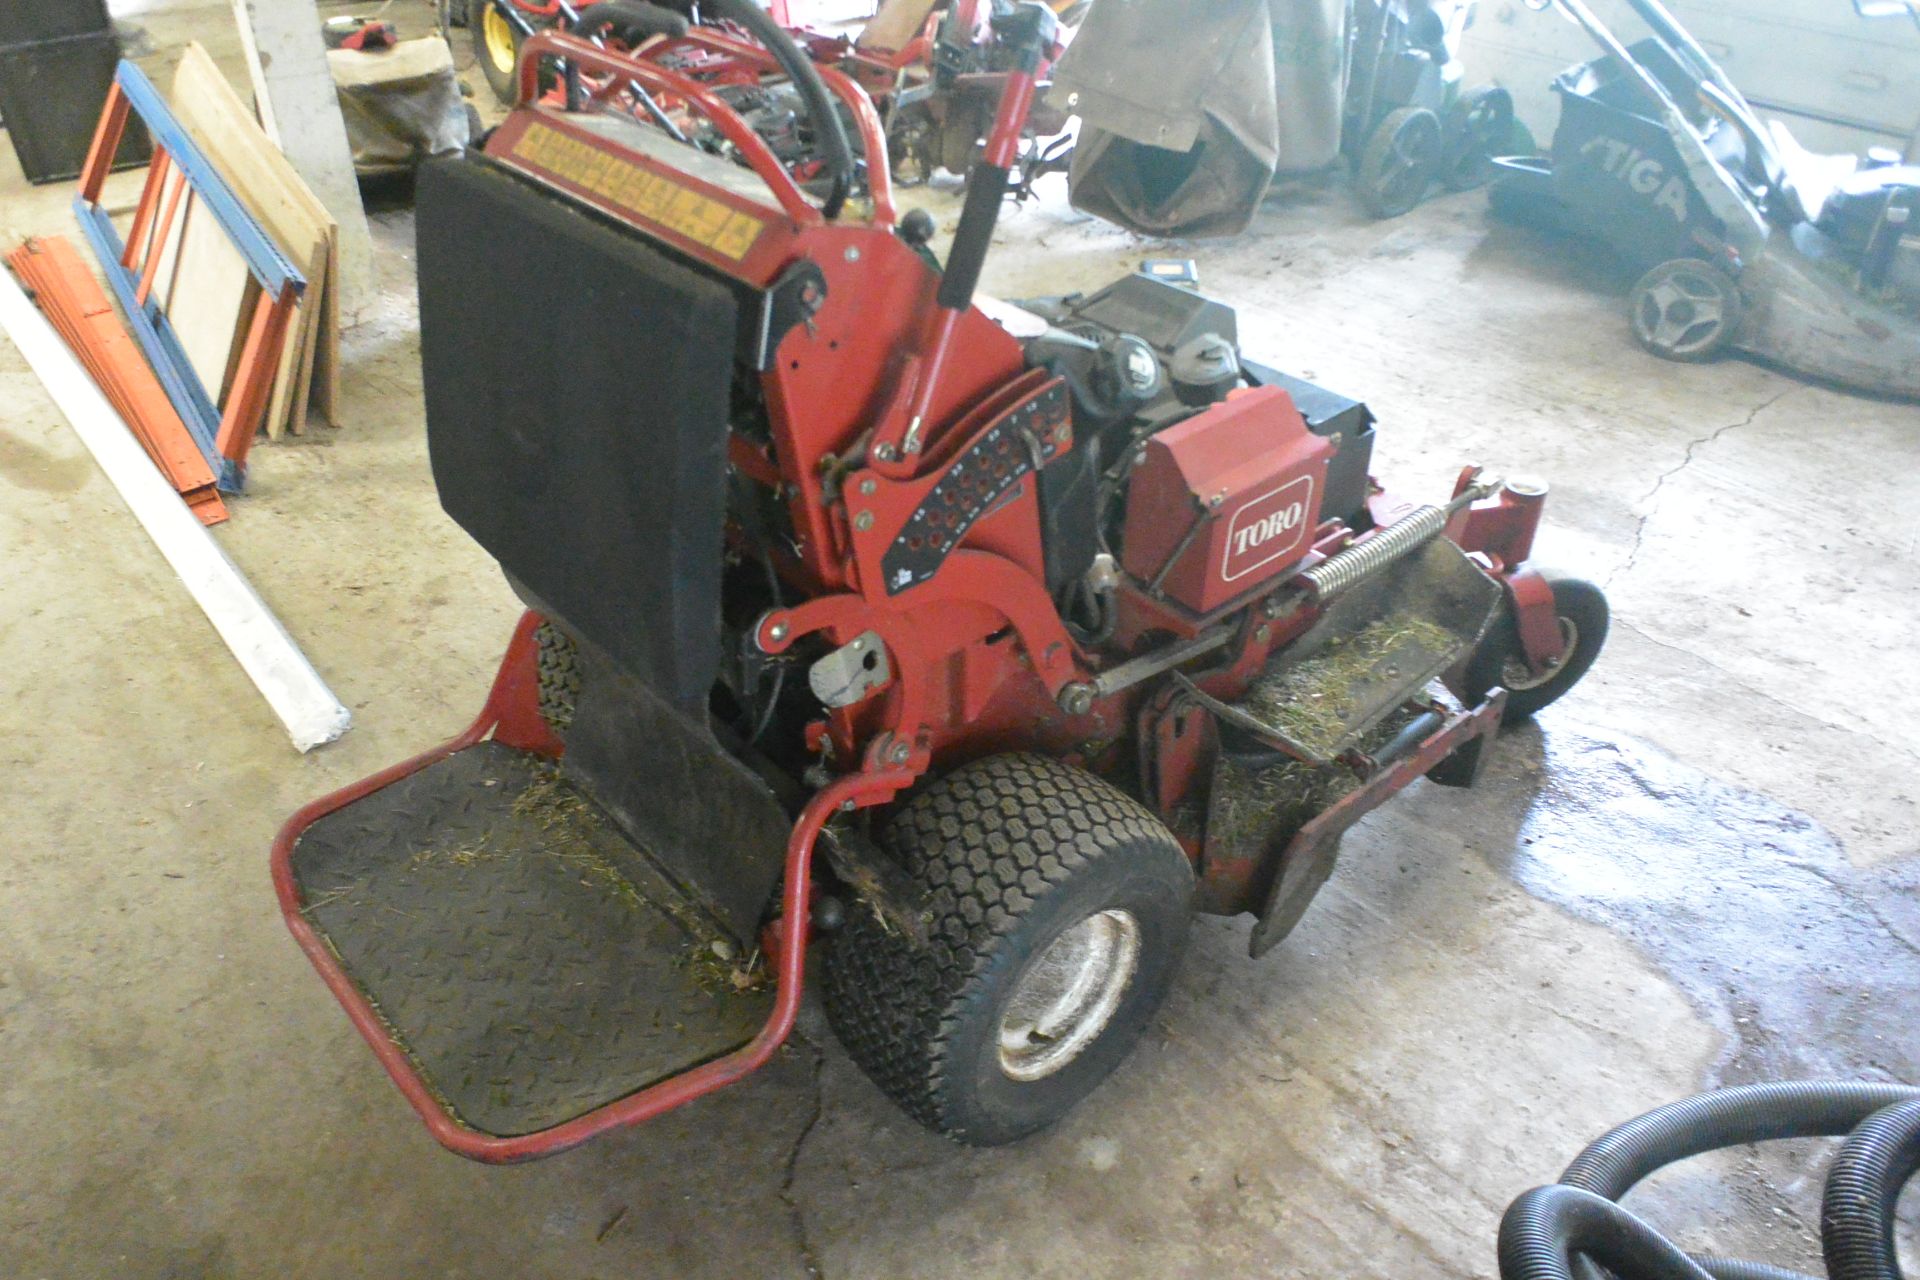 Toro compact grandstand turbo 40" stand-on side discharge mower (2018) - Image 5 of 7